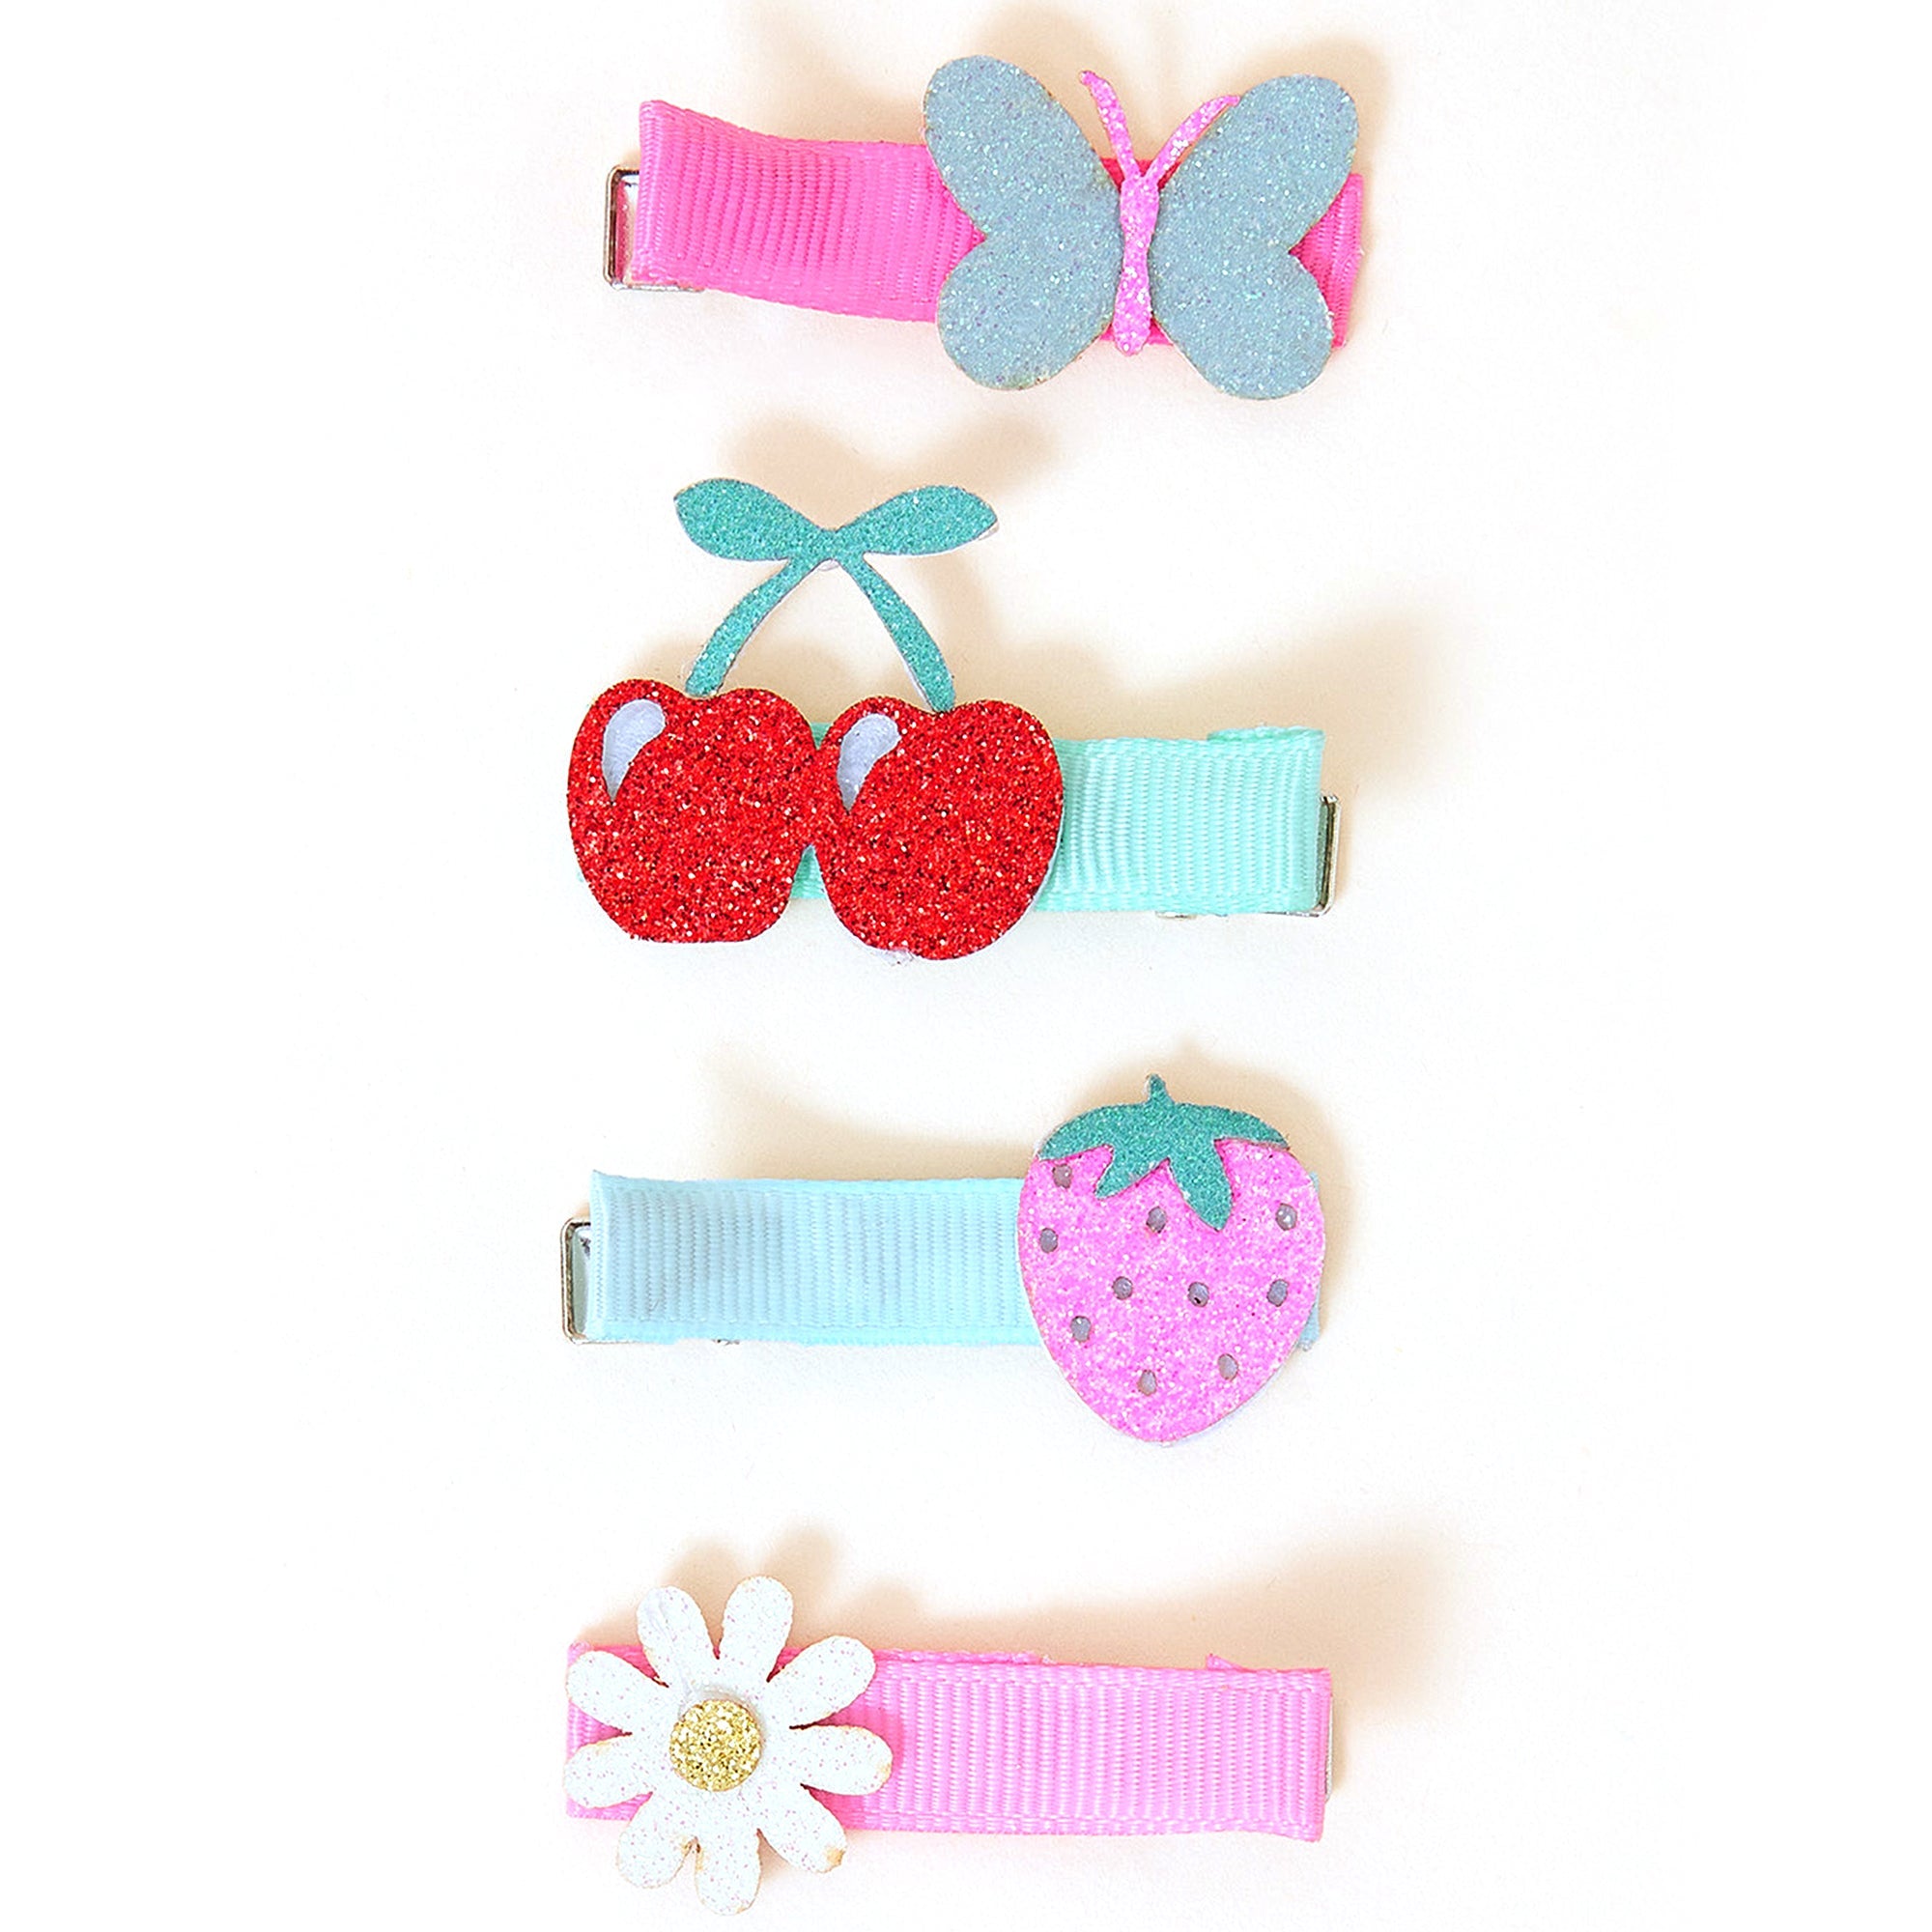 Accessorize London Girl's Spring Retro Salon Hair Clips Pack of 4